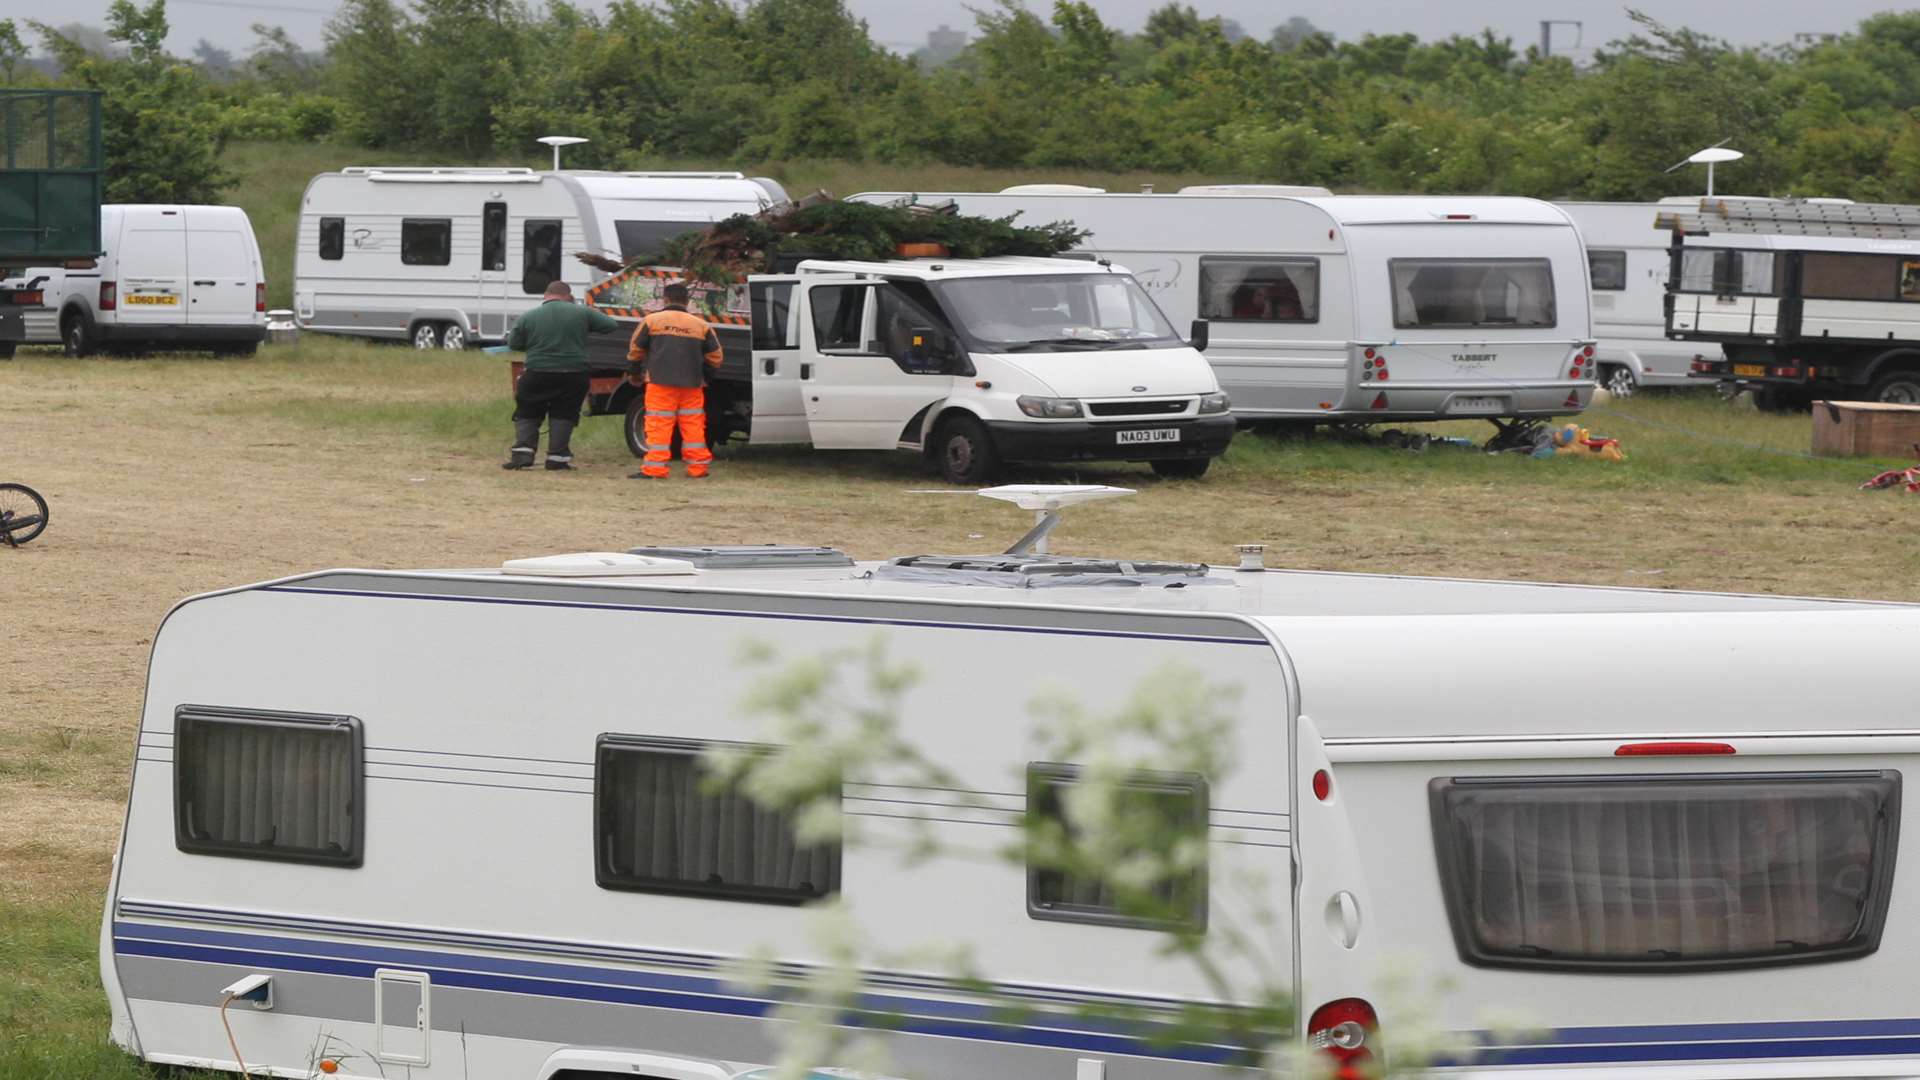 Travellers set up a camp on Saturday, May 23